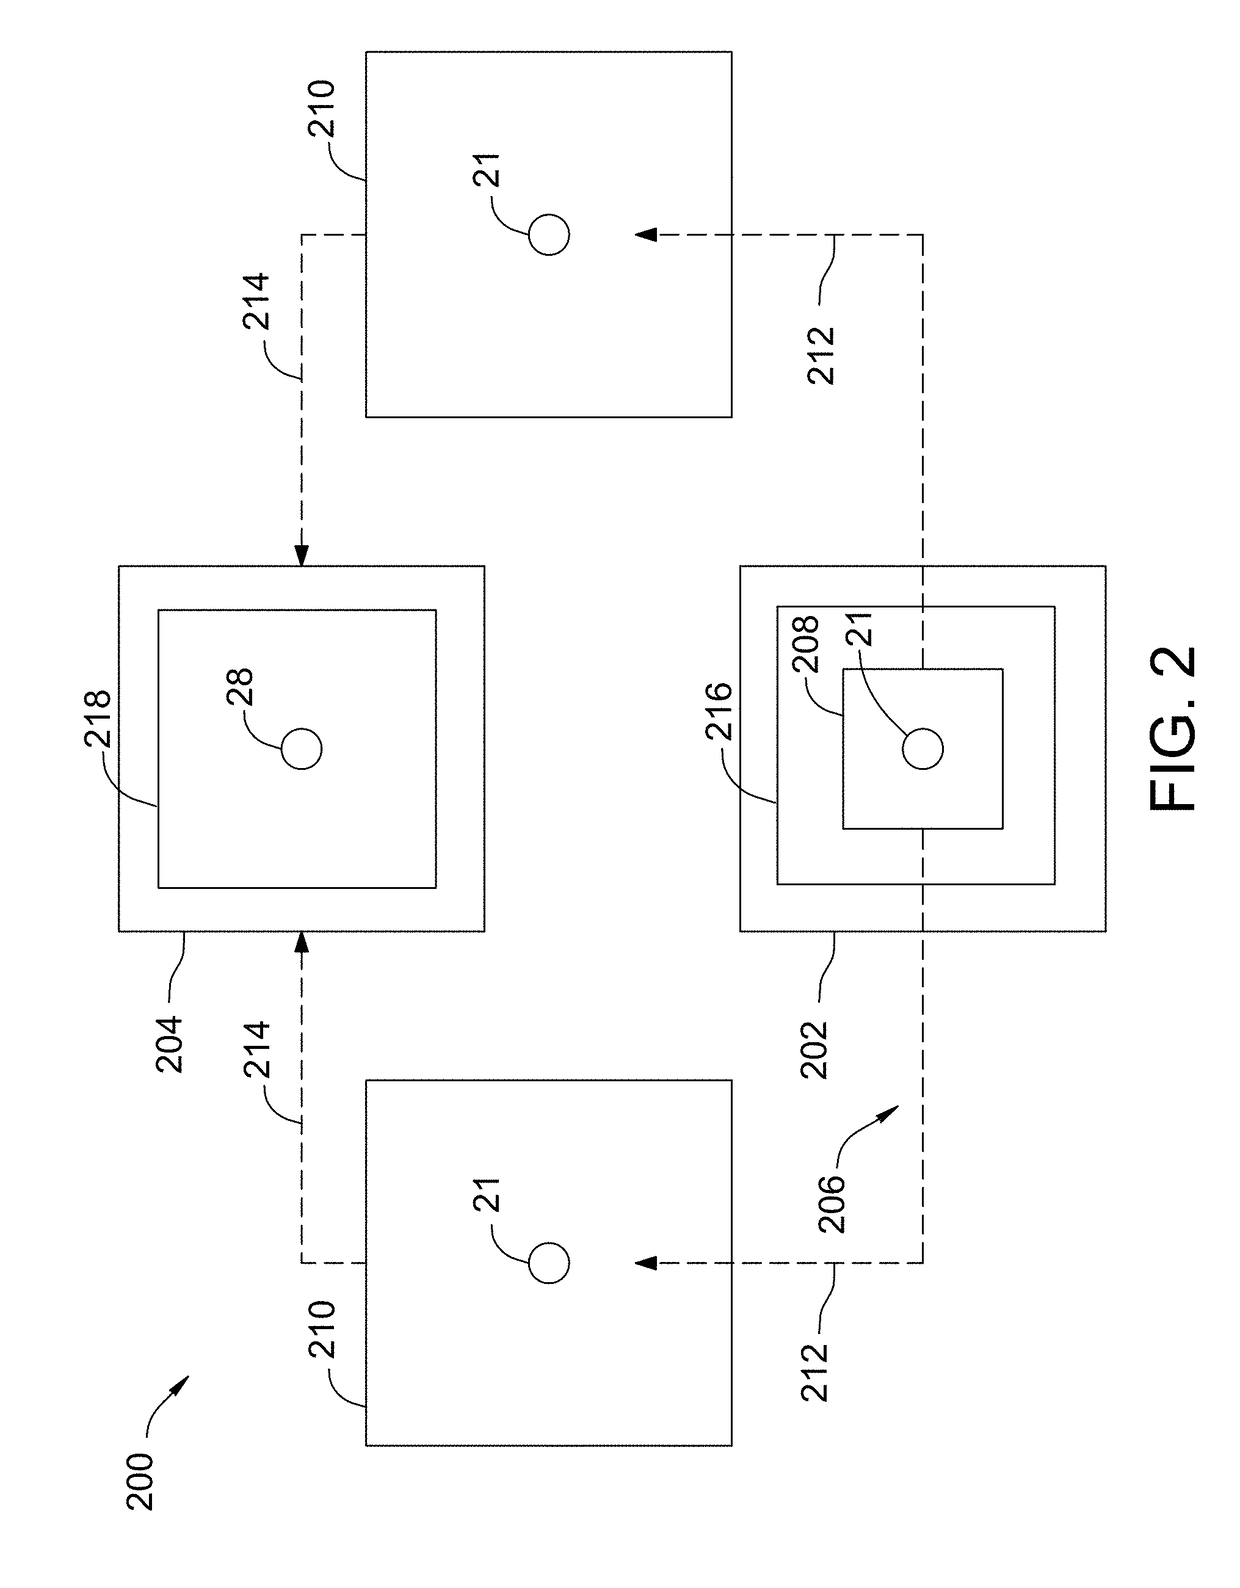 Systems and methods for powder pretreatment in additive manufacturing